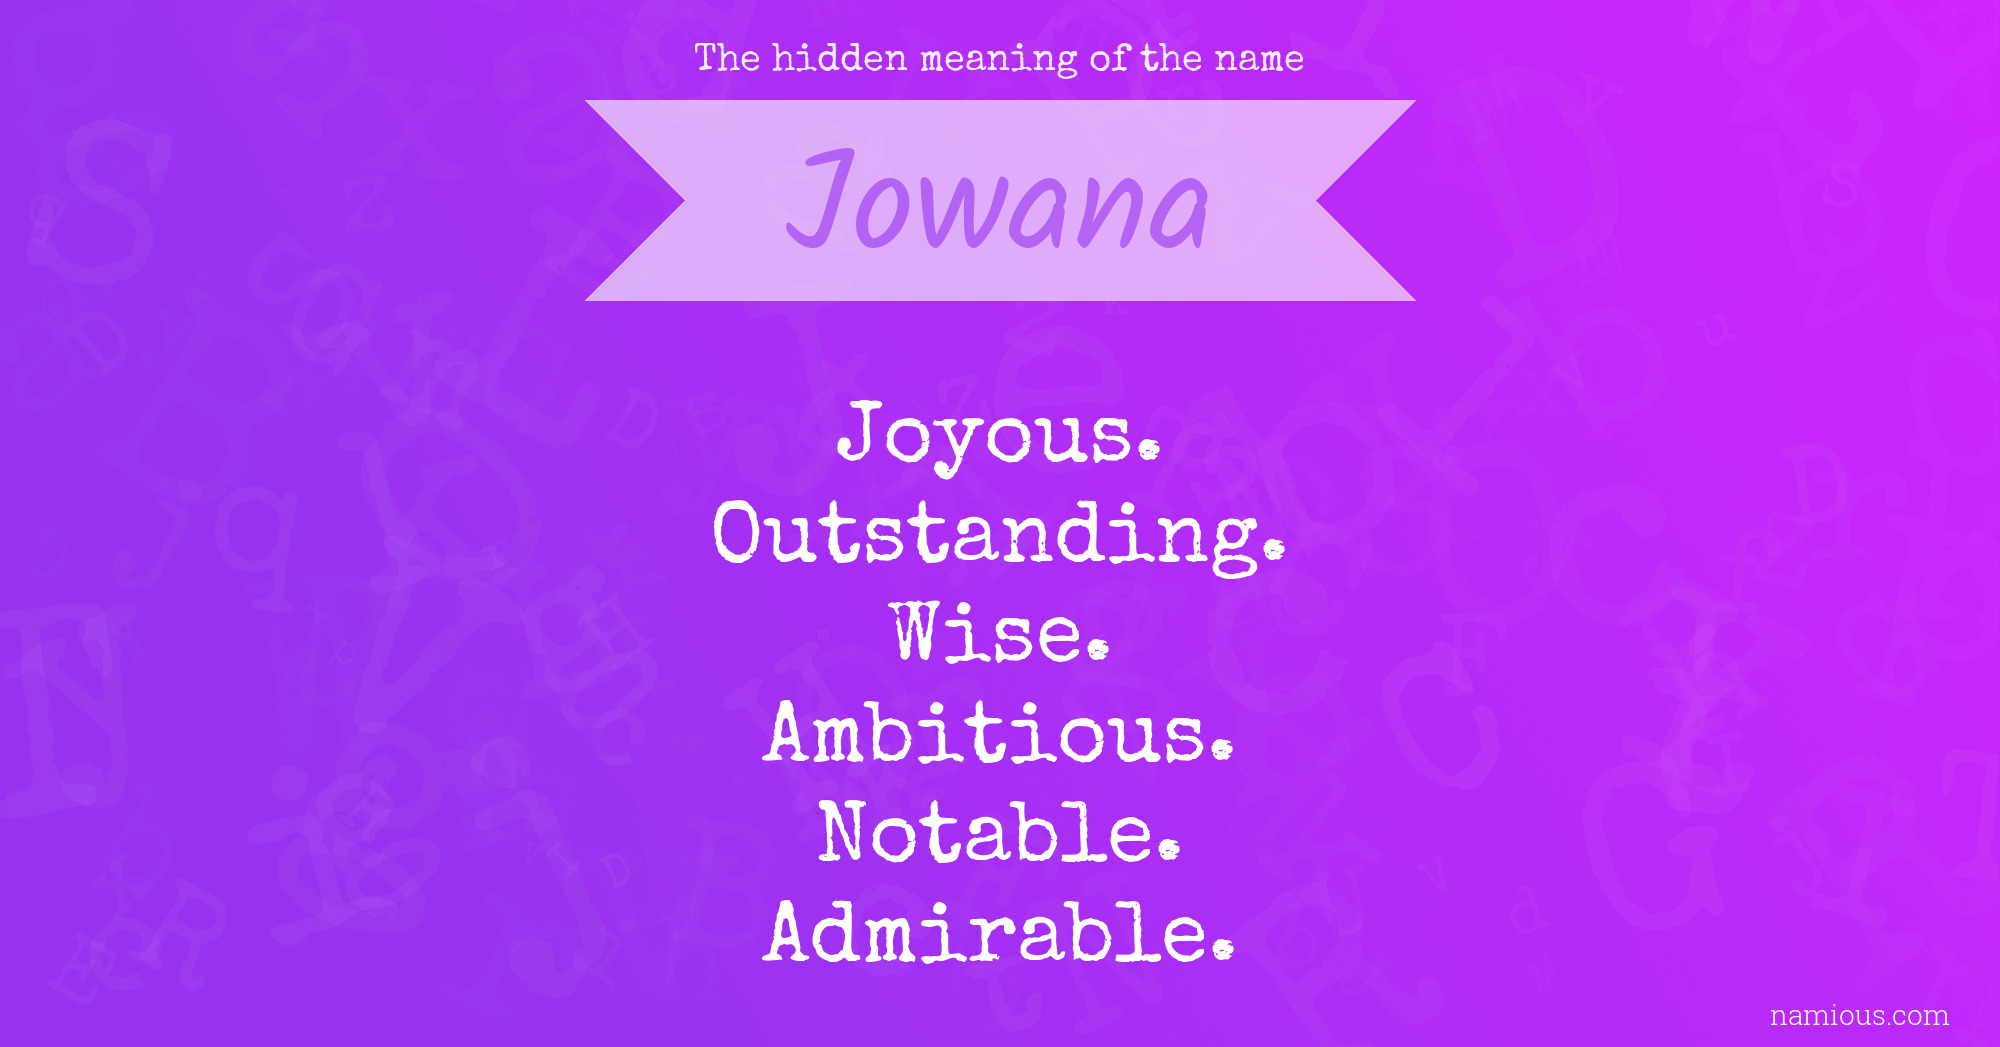 The hidden meaning of the name Jowana